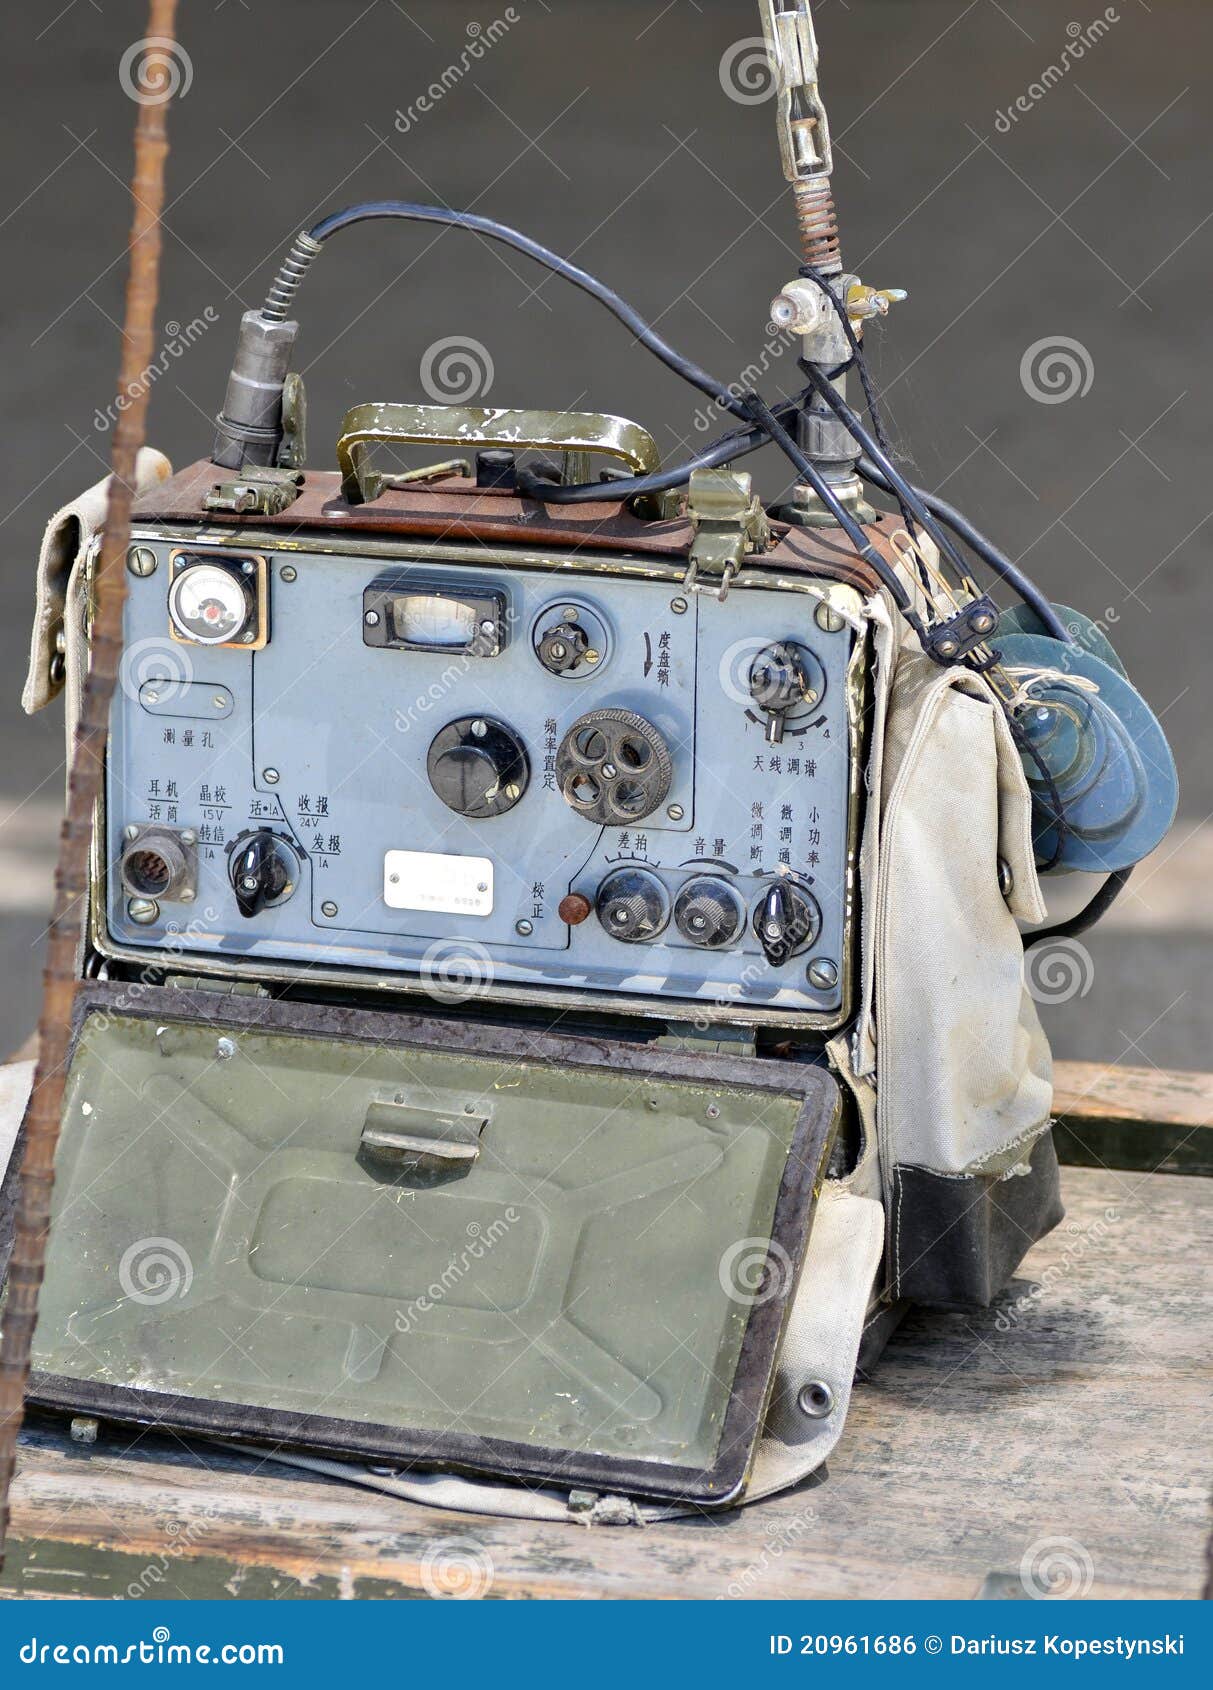 Military chinese radio stock photo. Image of detail, dial - 20961686